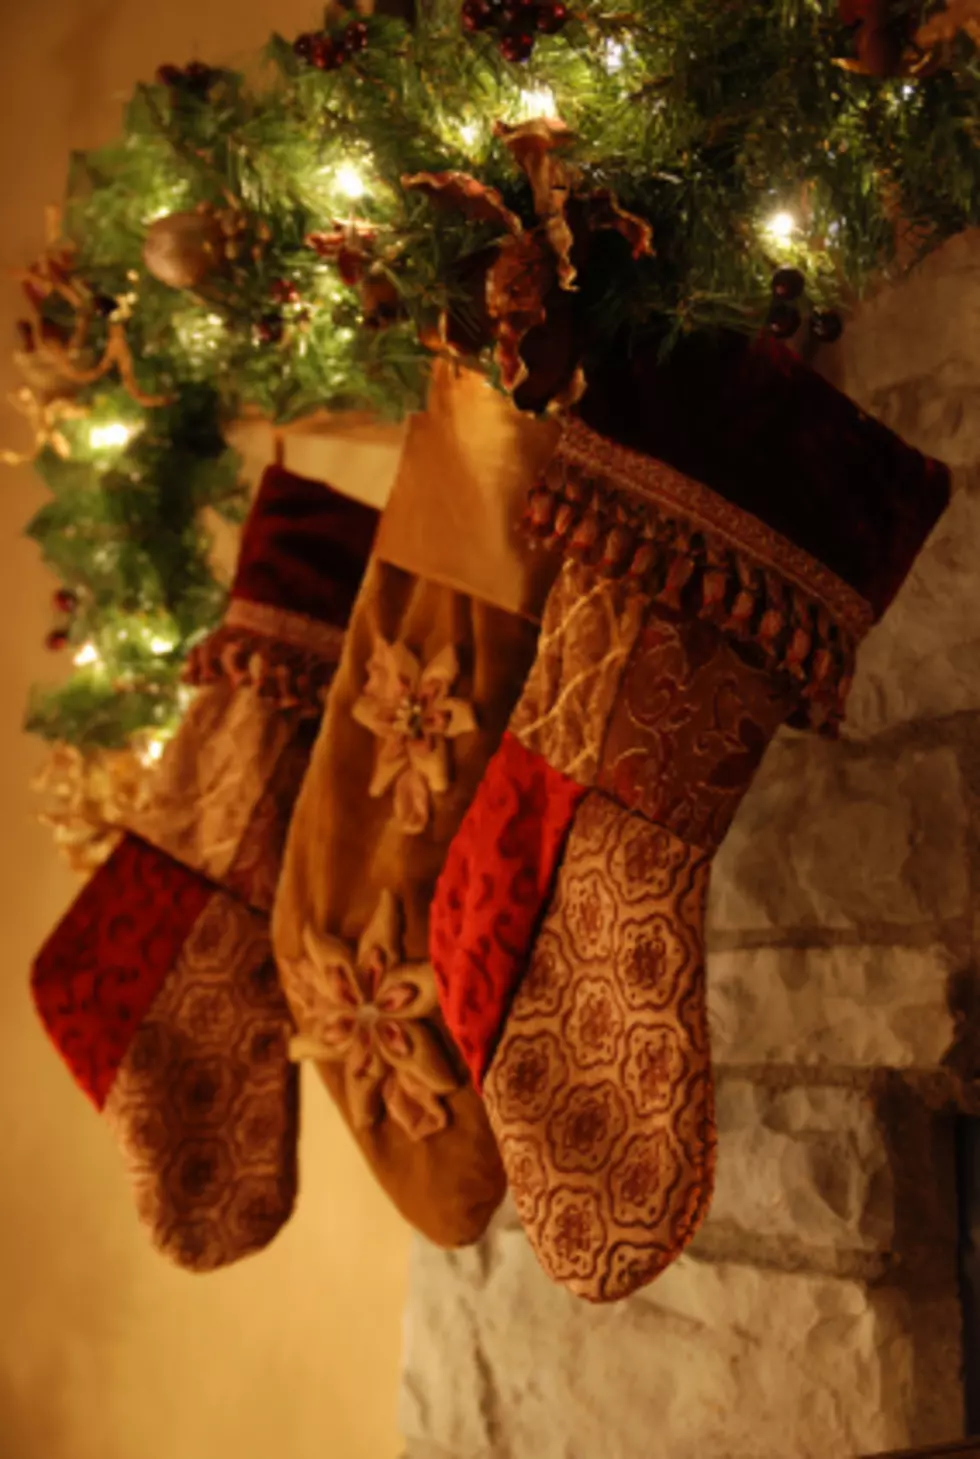 What Was in Your Christmas Stocking Growing-Up?